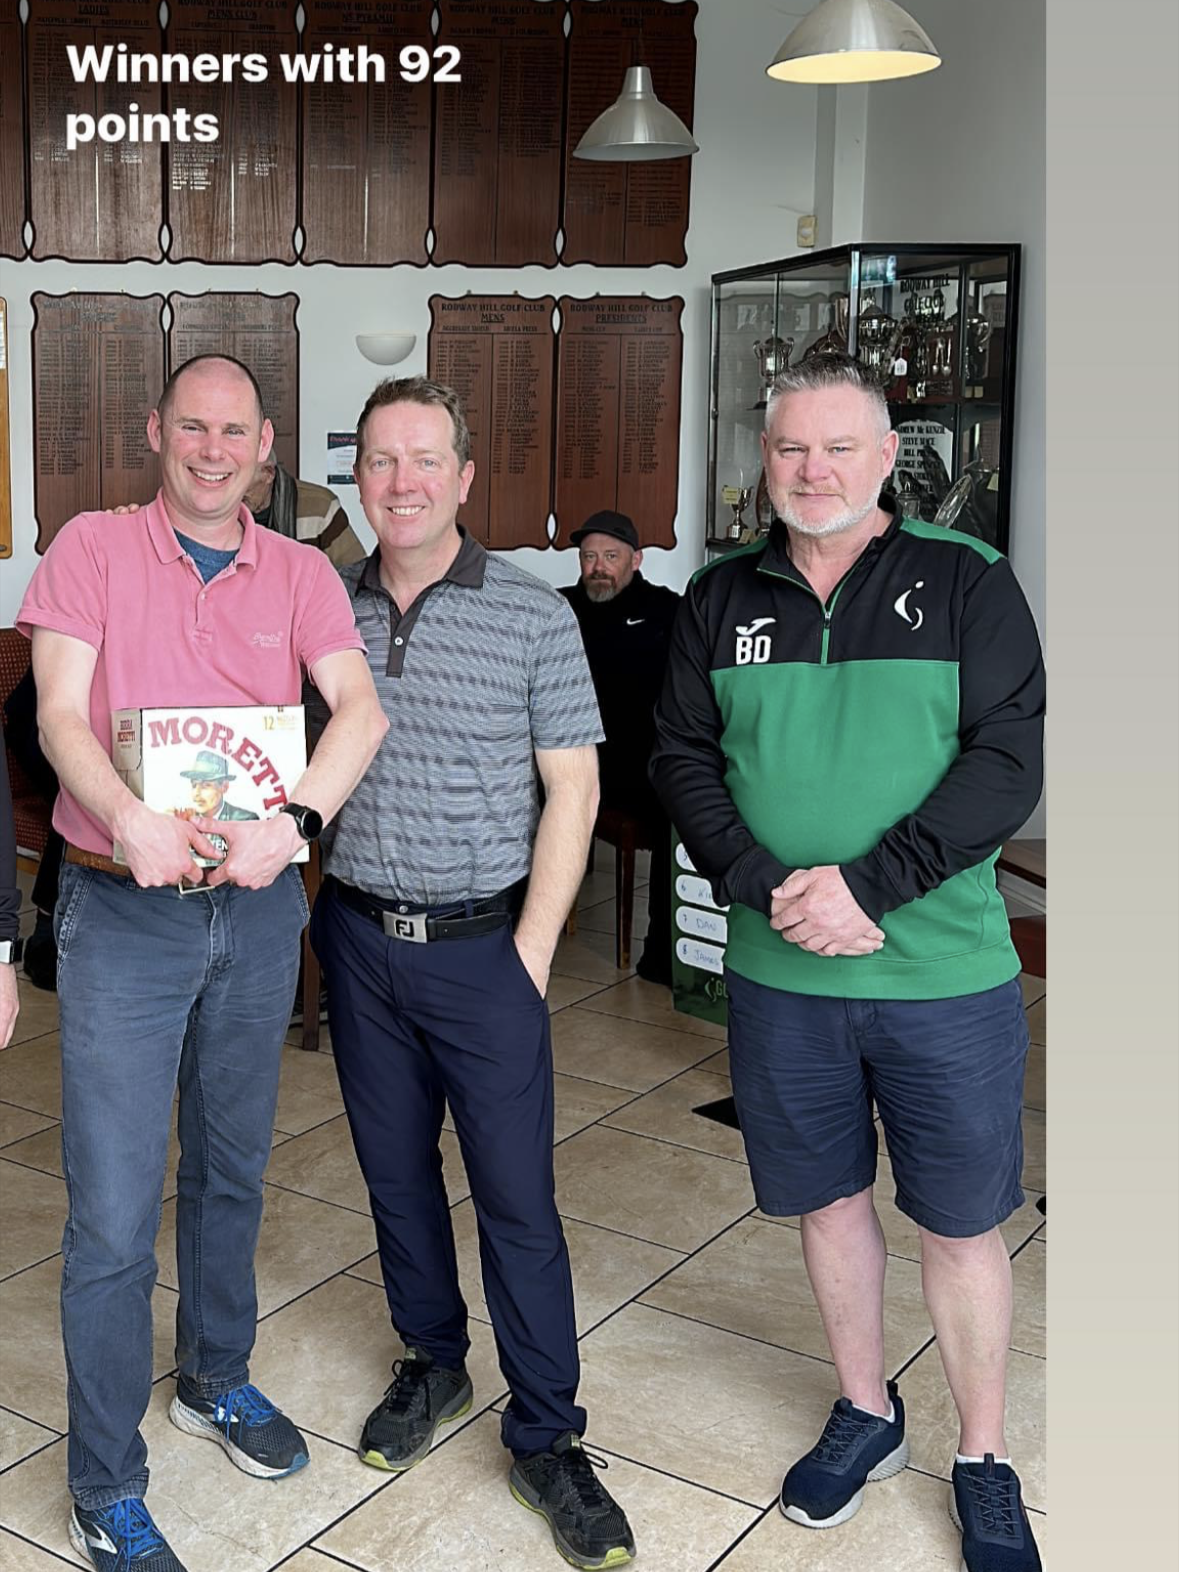 2 players from the winning team accepting their prize, a crate of beer, and a 4-ball voucher for the Marriott Worseley Park